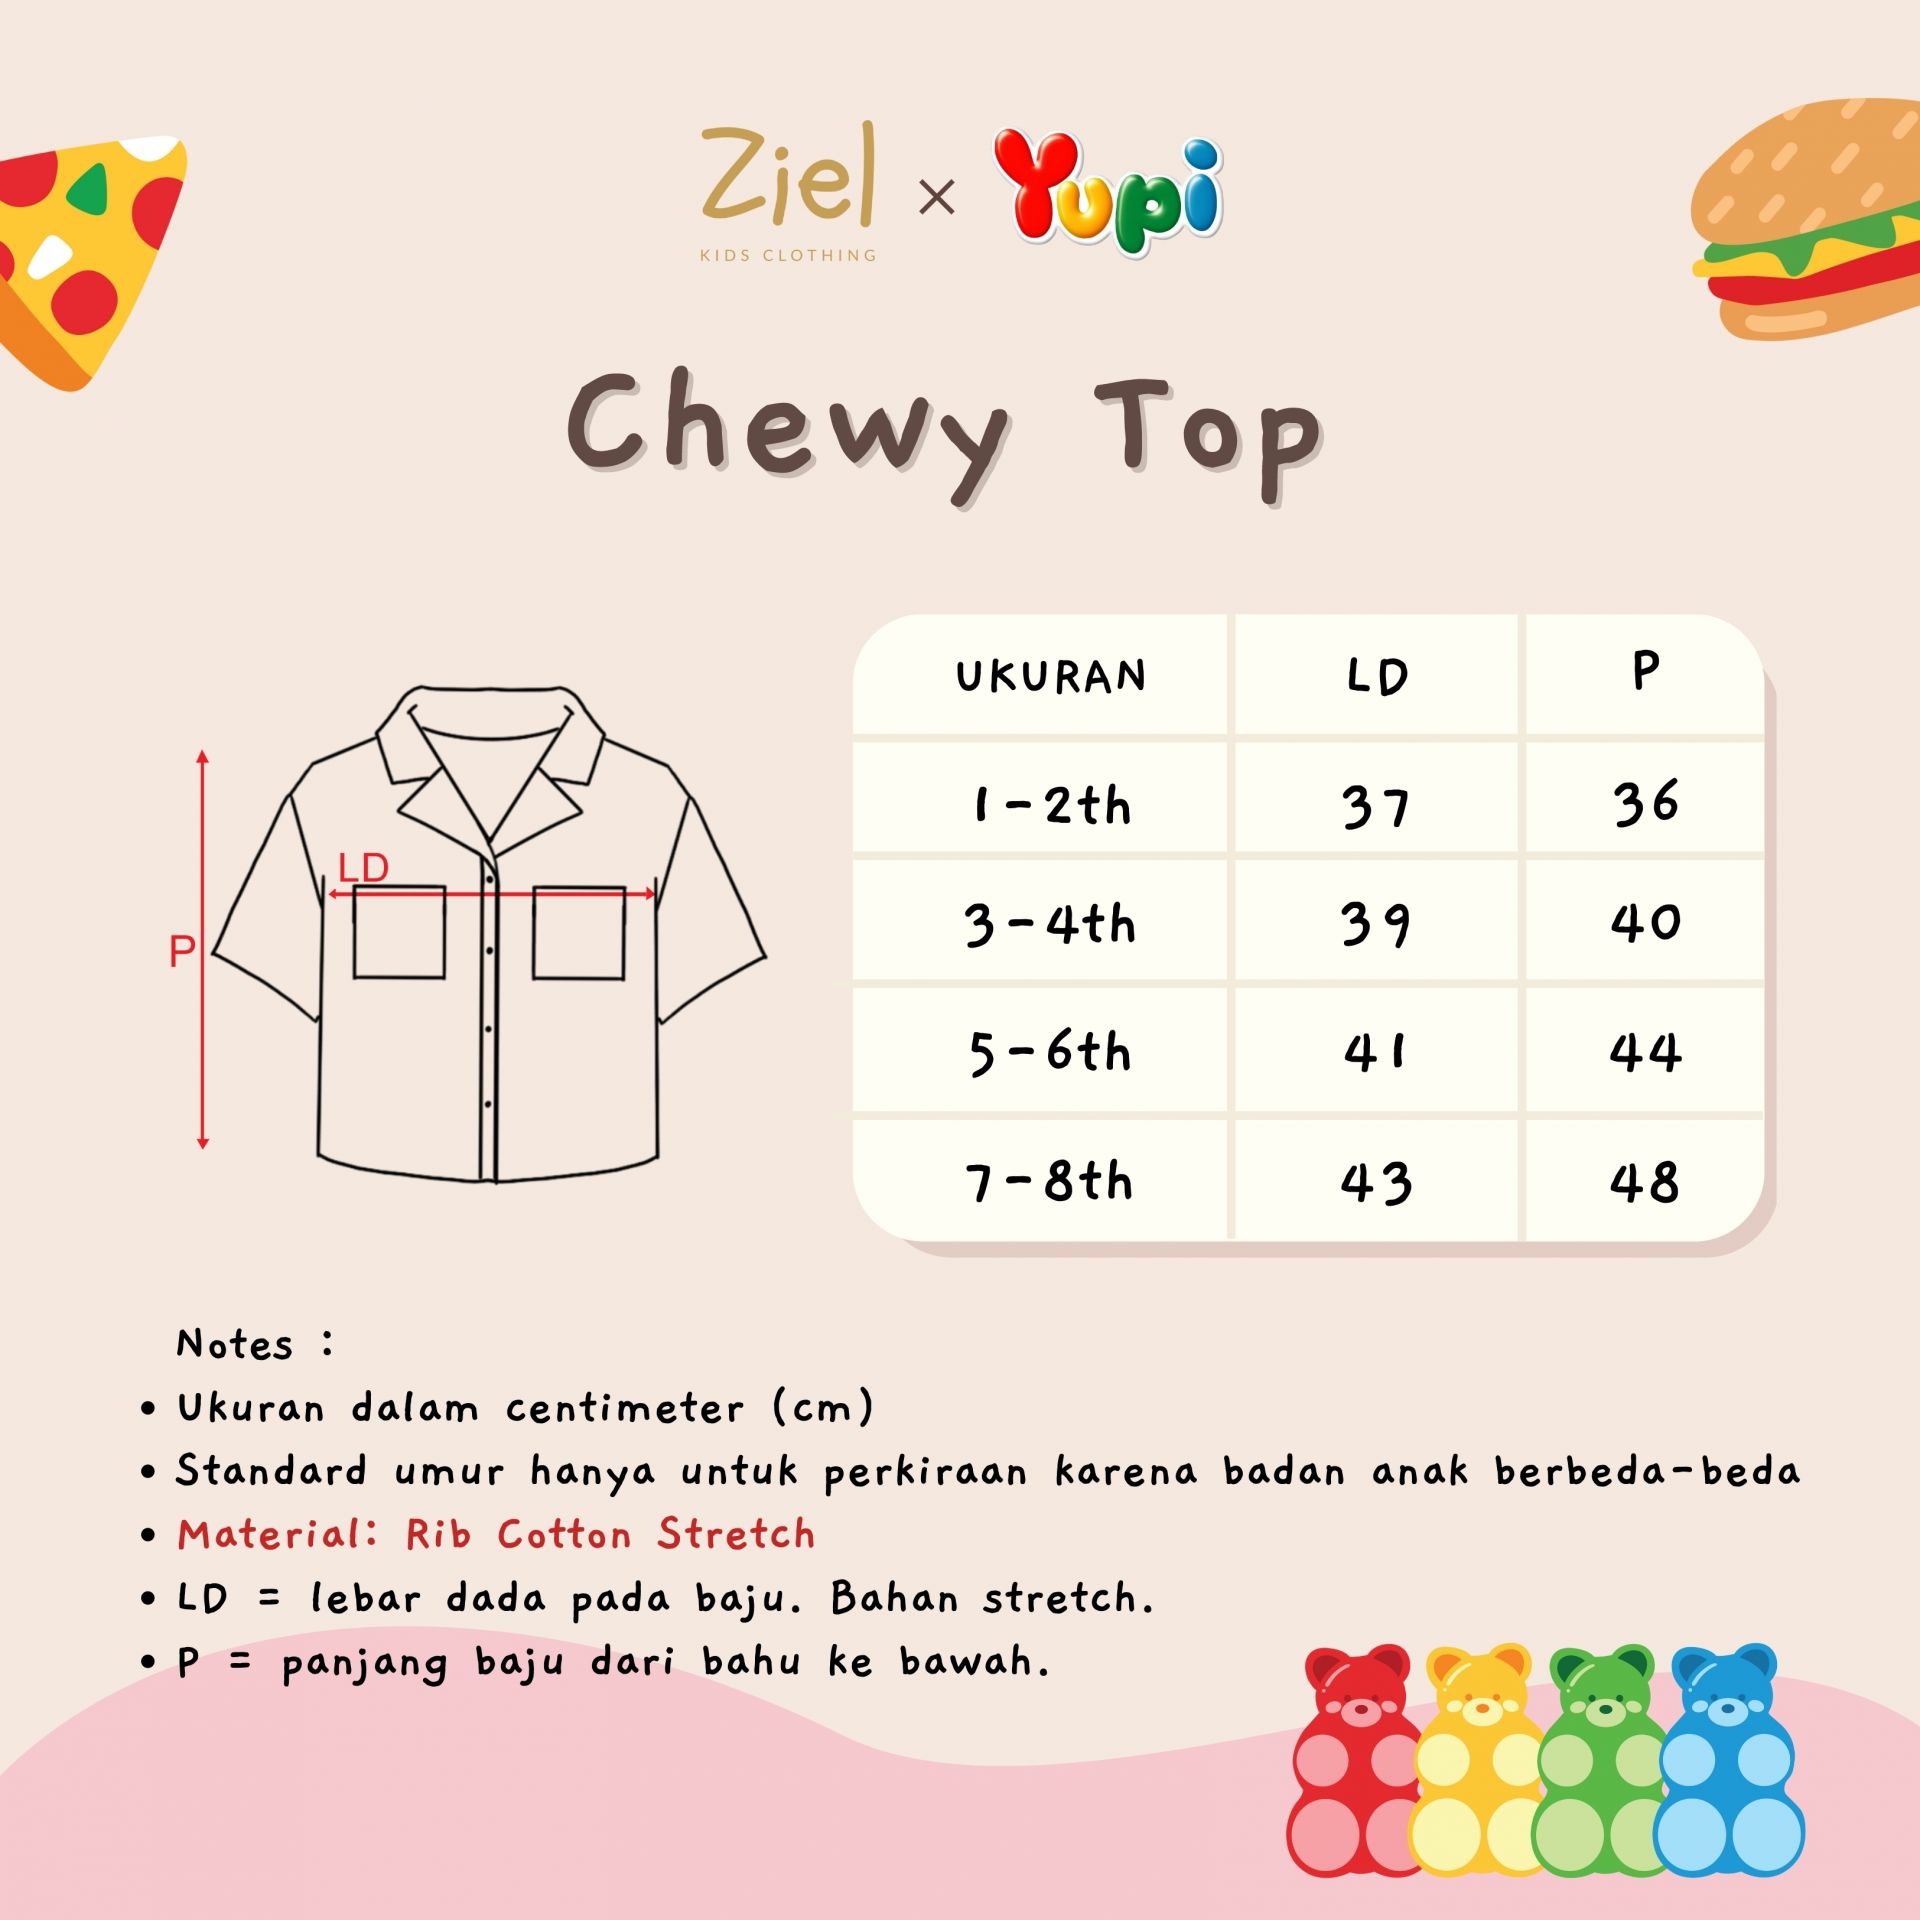 Chewy top - Size chart